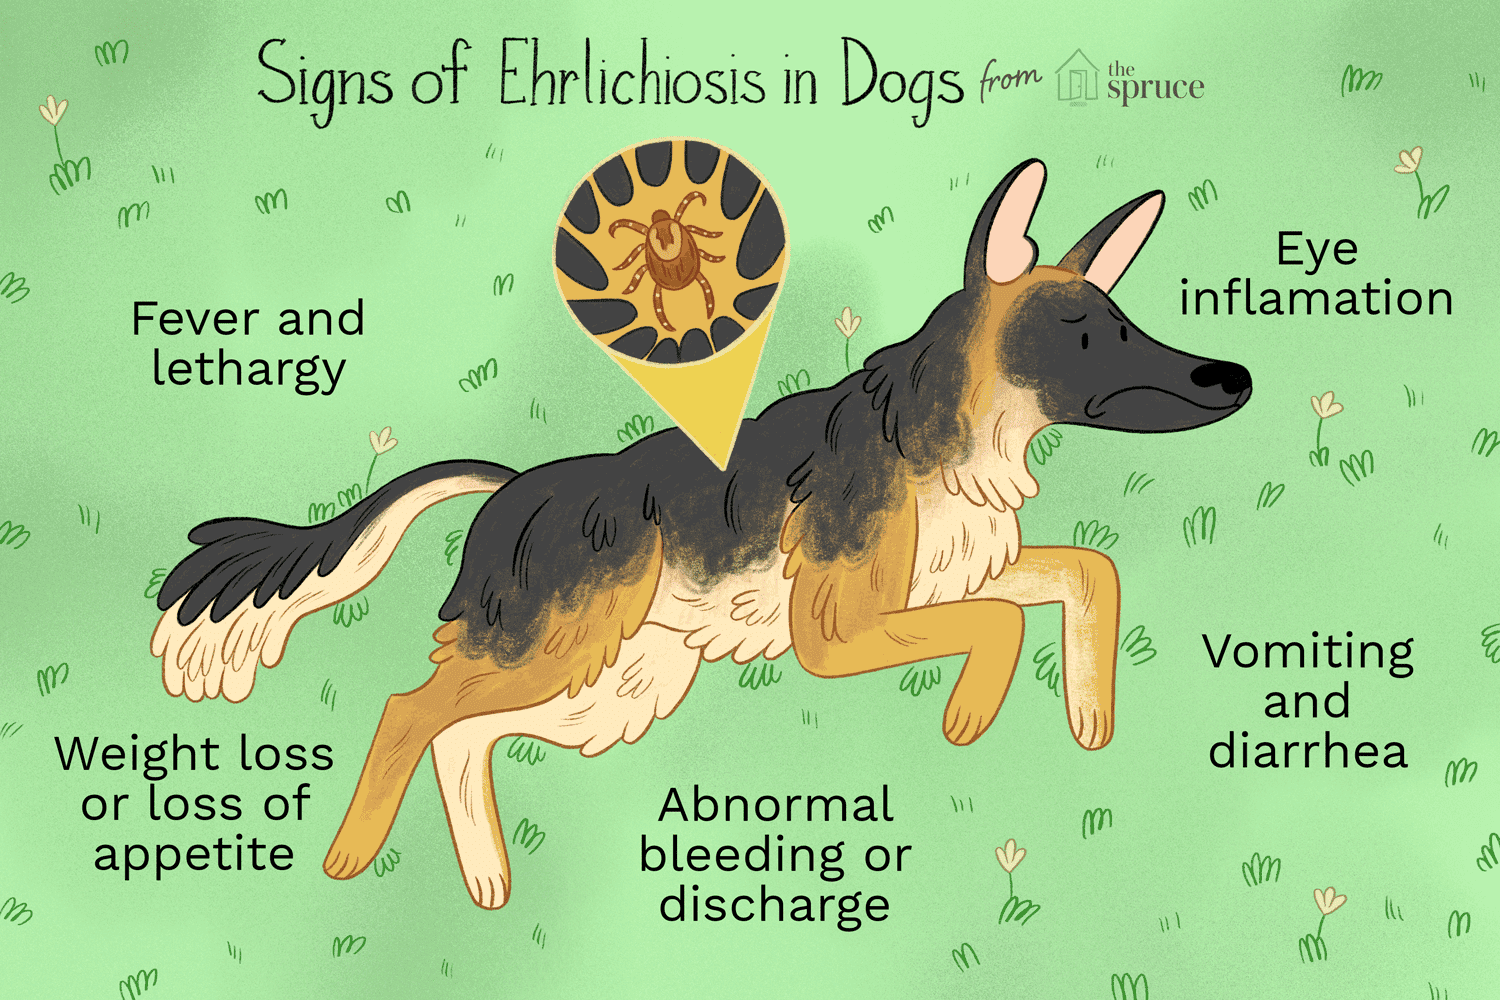 Illustration of signs of ehrilichiosis in dogs